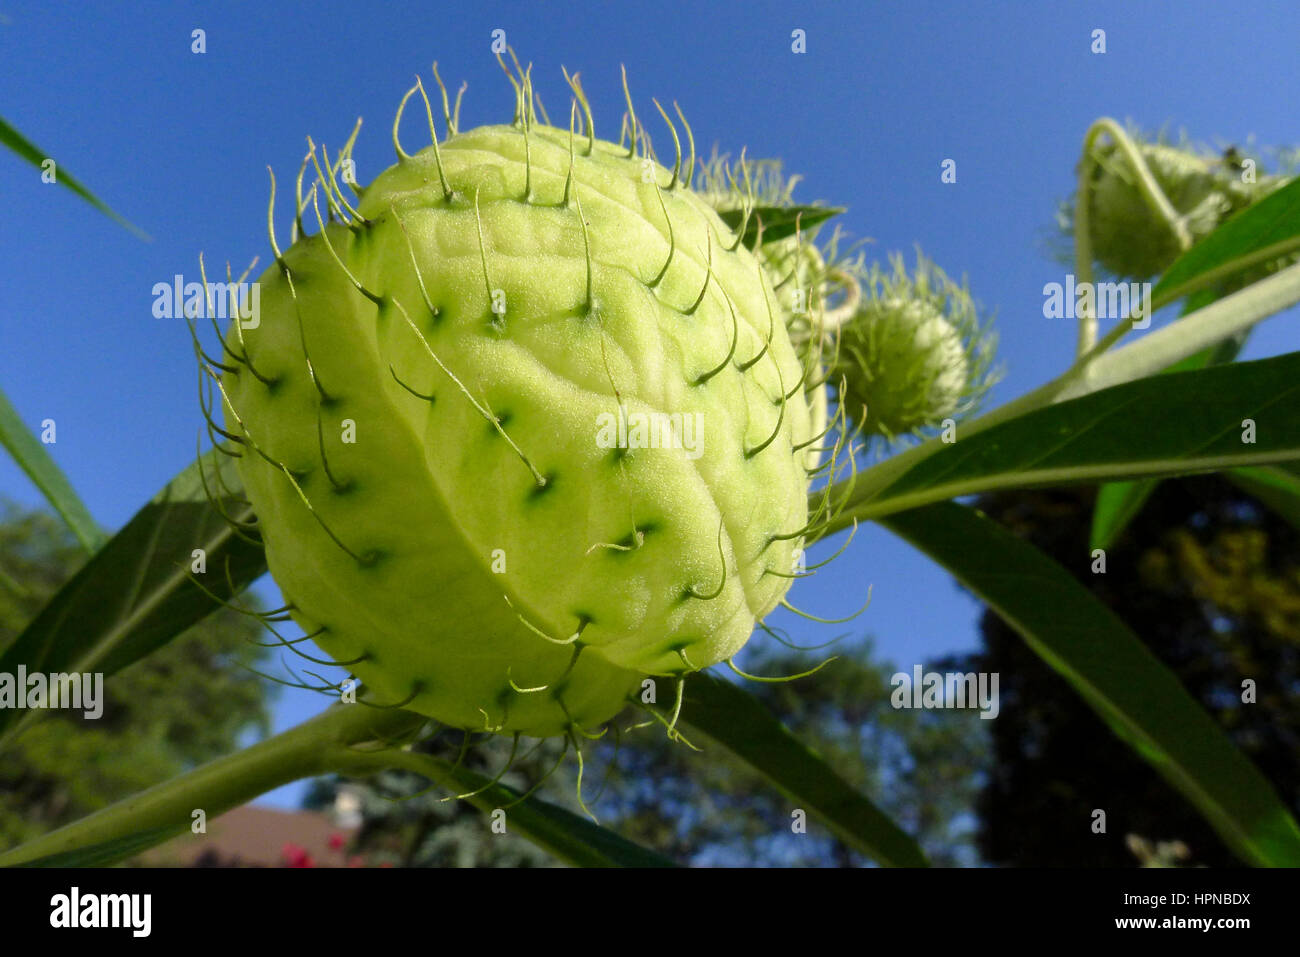 The strange and unusual inflated seedpods of Gomphocarpus physocarpus also known as balloon plant, hairy balls and Balloon cotton bush. Stock Photo